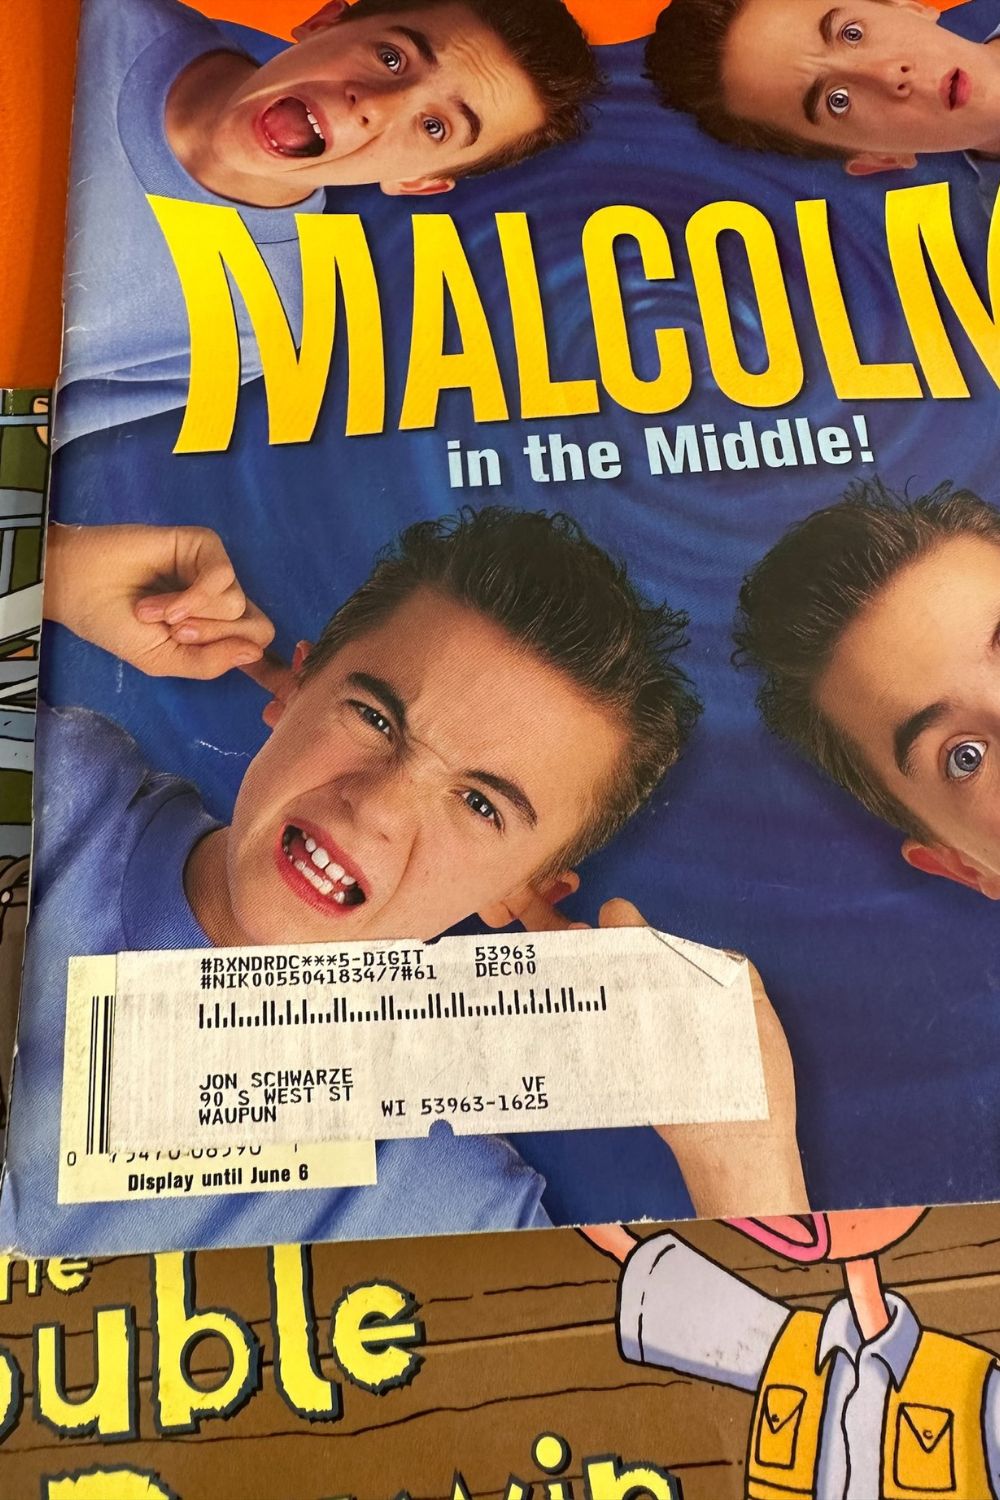 NICKELODEON MAGAZINE MAY 2000 ISSUE: "MALCOLM IN THE MIDDLE" COVER*